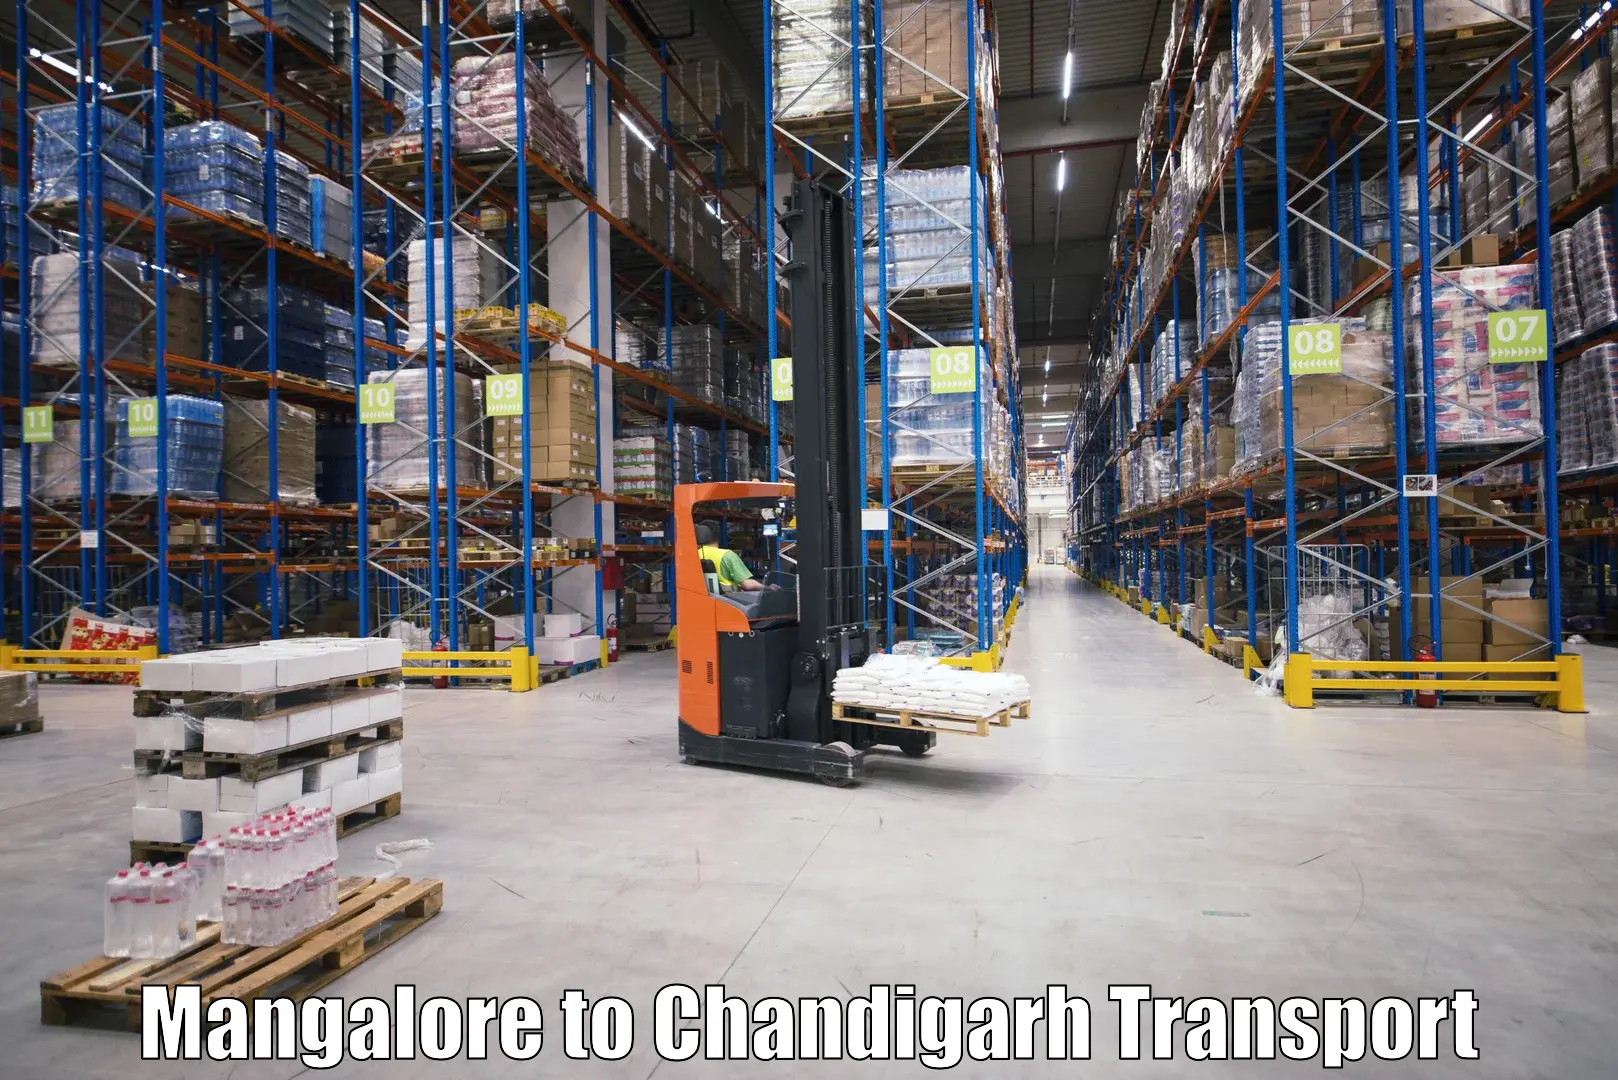 Transport bike from one state to another Mangalore to Chandigarh